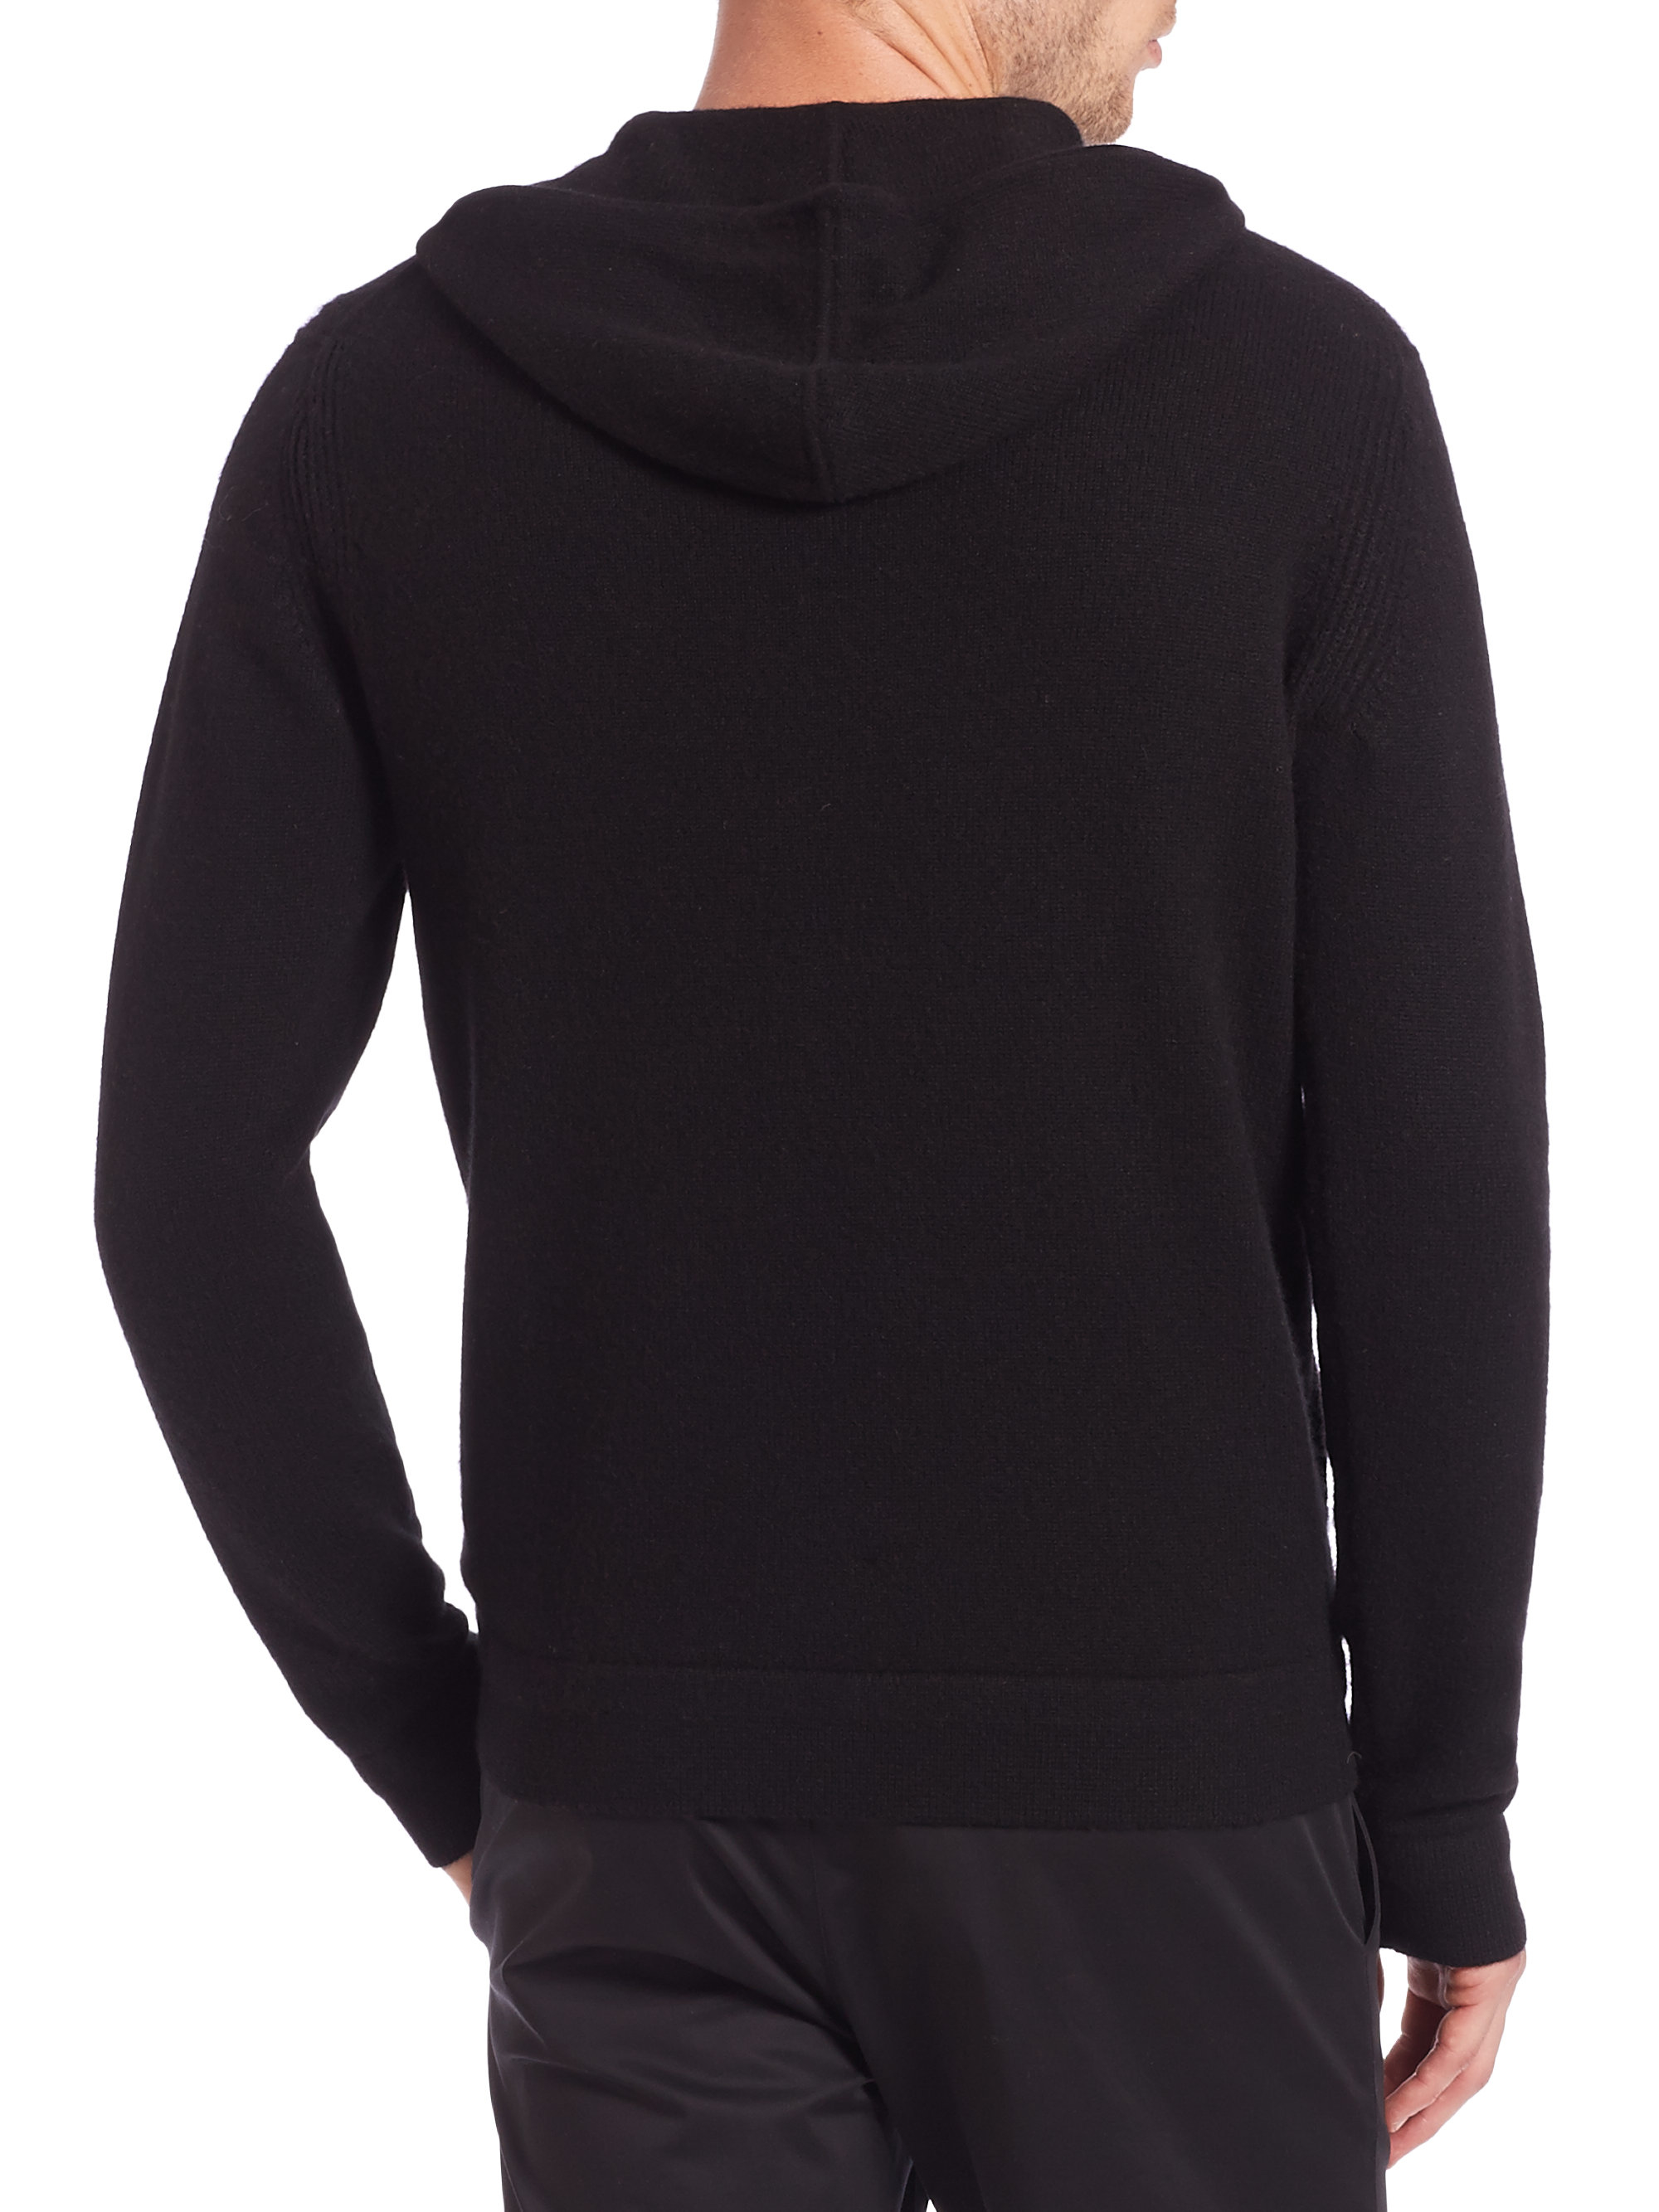 Theory Cashmere Zip Hoodie in Black for Men - Lyst